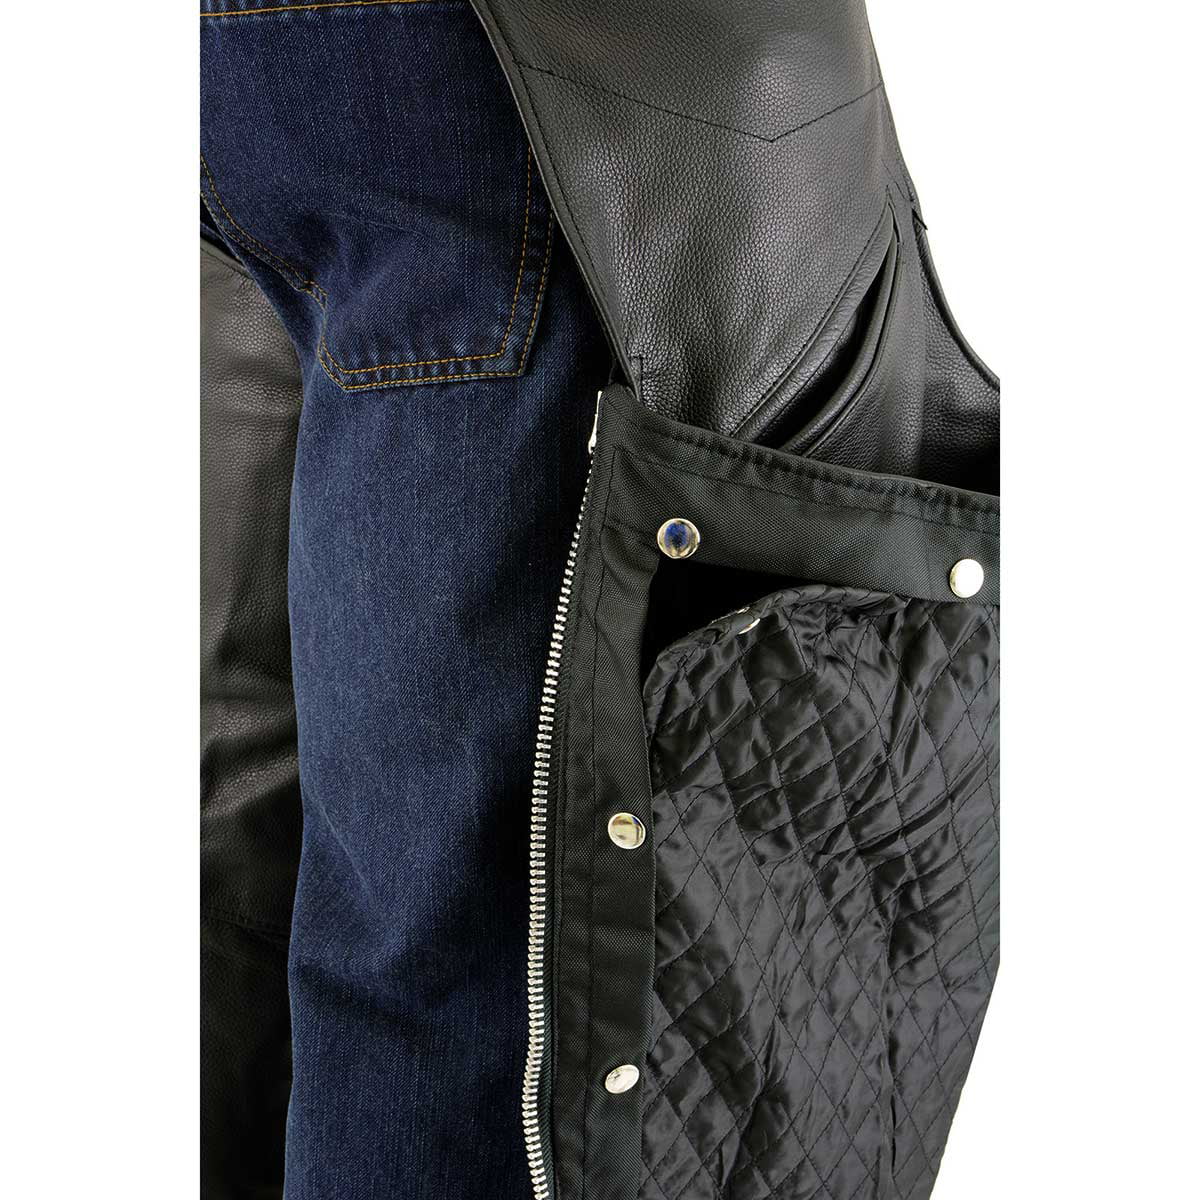 Black, X-Large Milwaukee Slash Pocket Leather Chaps with Removable Thermal Liner 